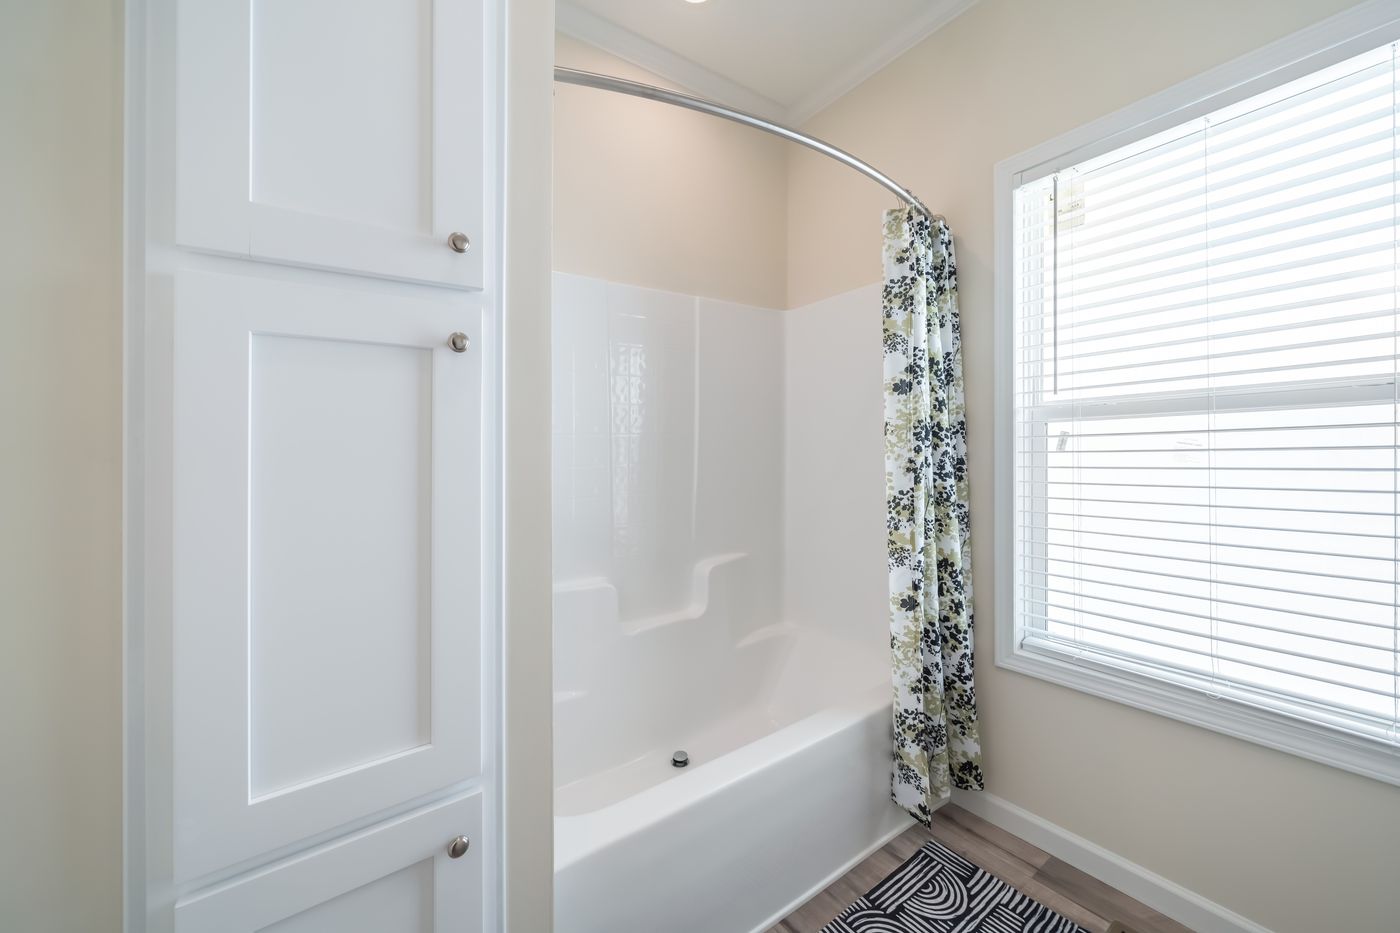 The SUPER 68 ELITE Guest Bathroom. This Manufactured Mobile Home features 3 bedrooms and 2 baths.